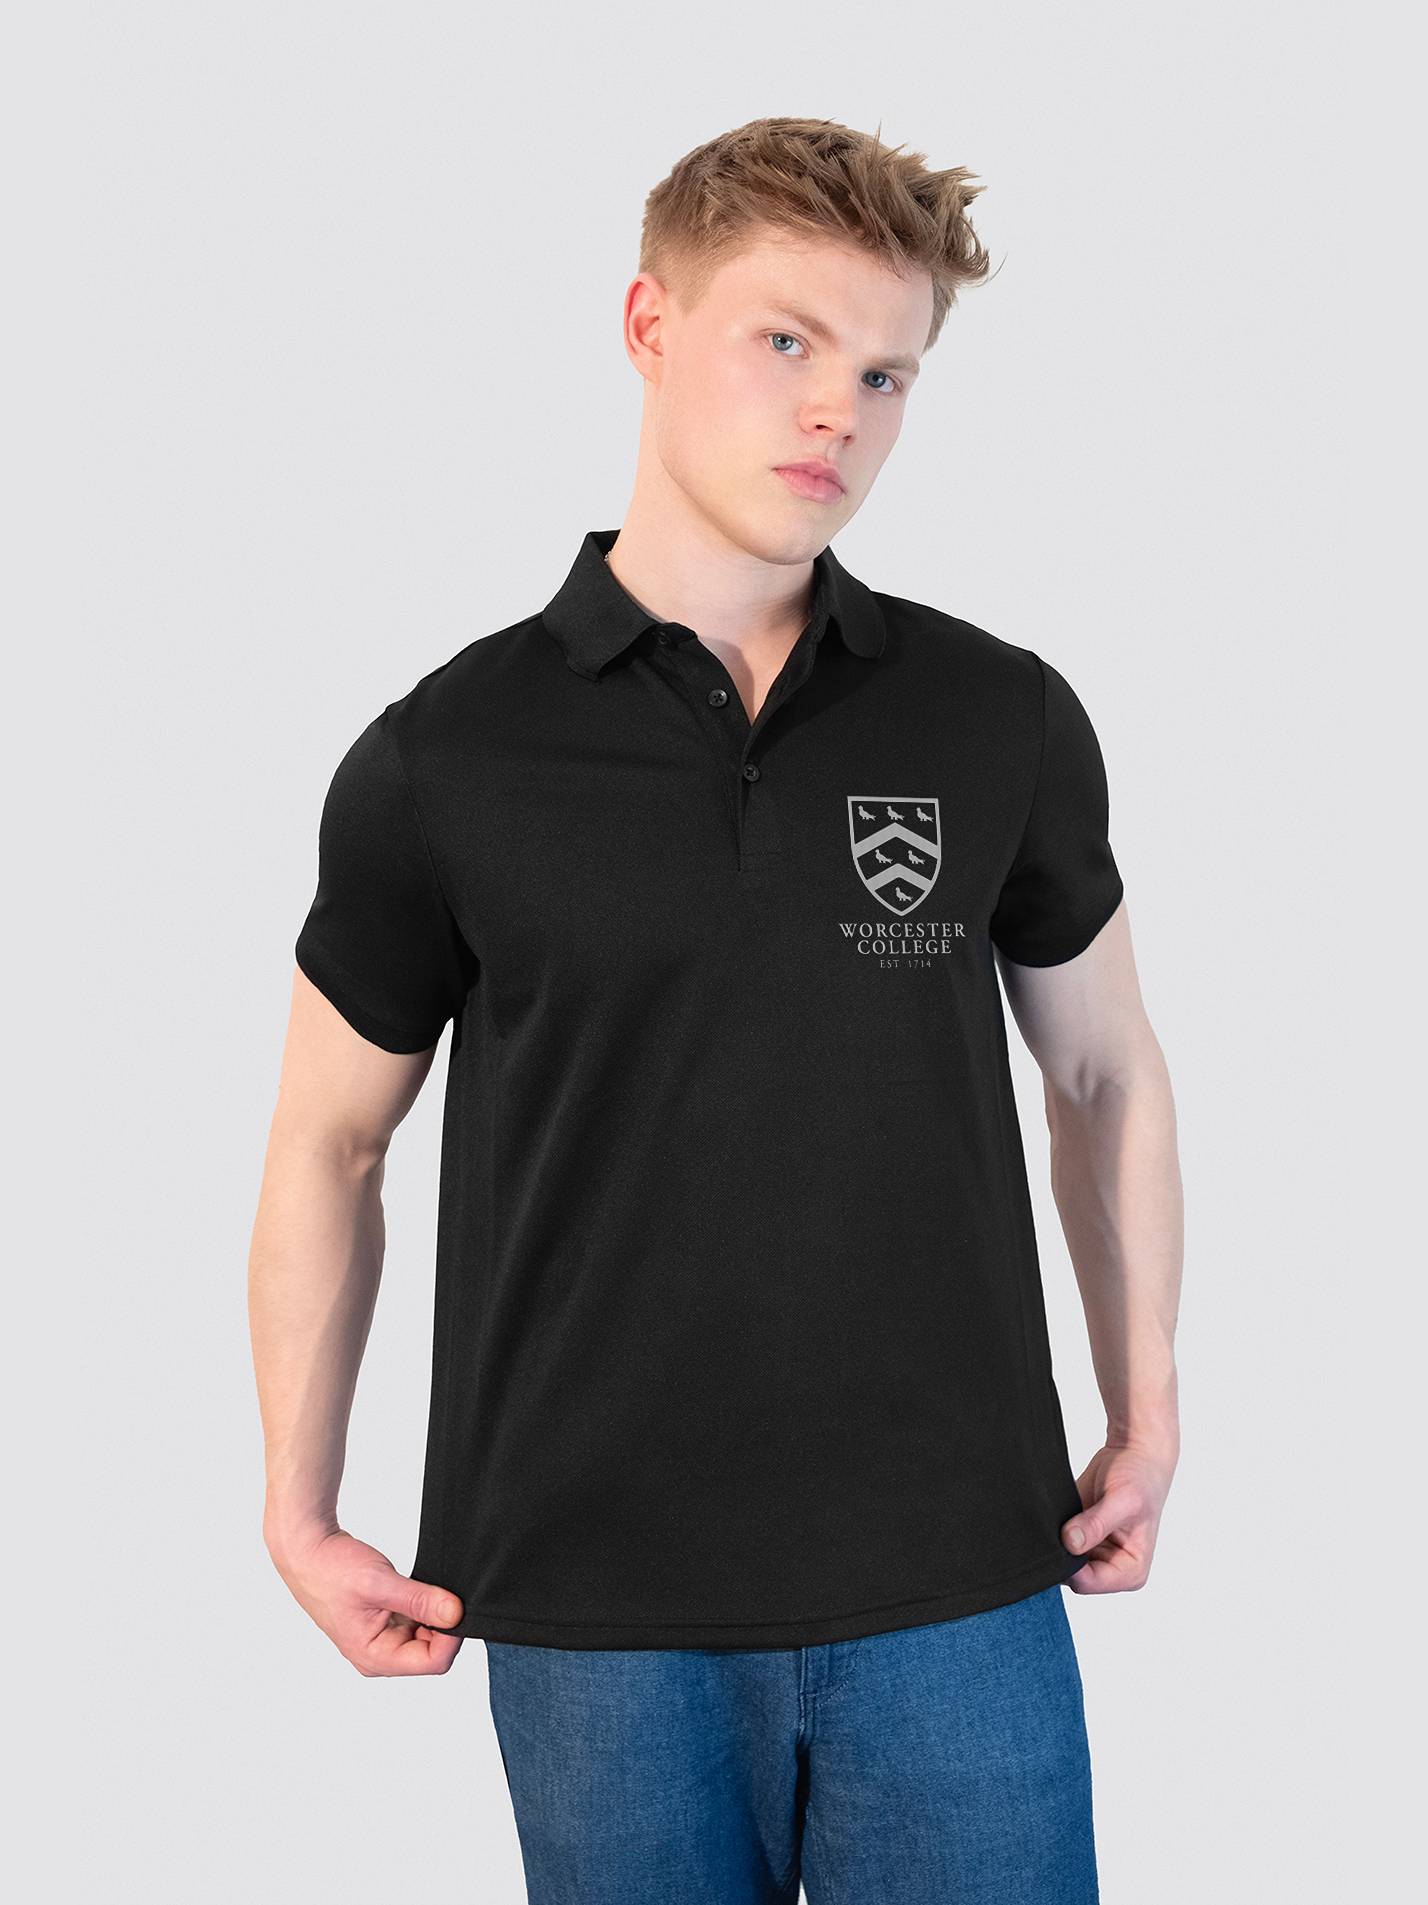 Worcester College Oxford JCR Sustainable Men's Polo Shirt